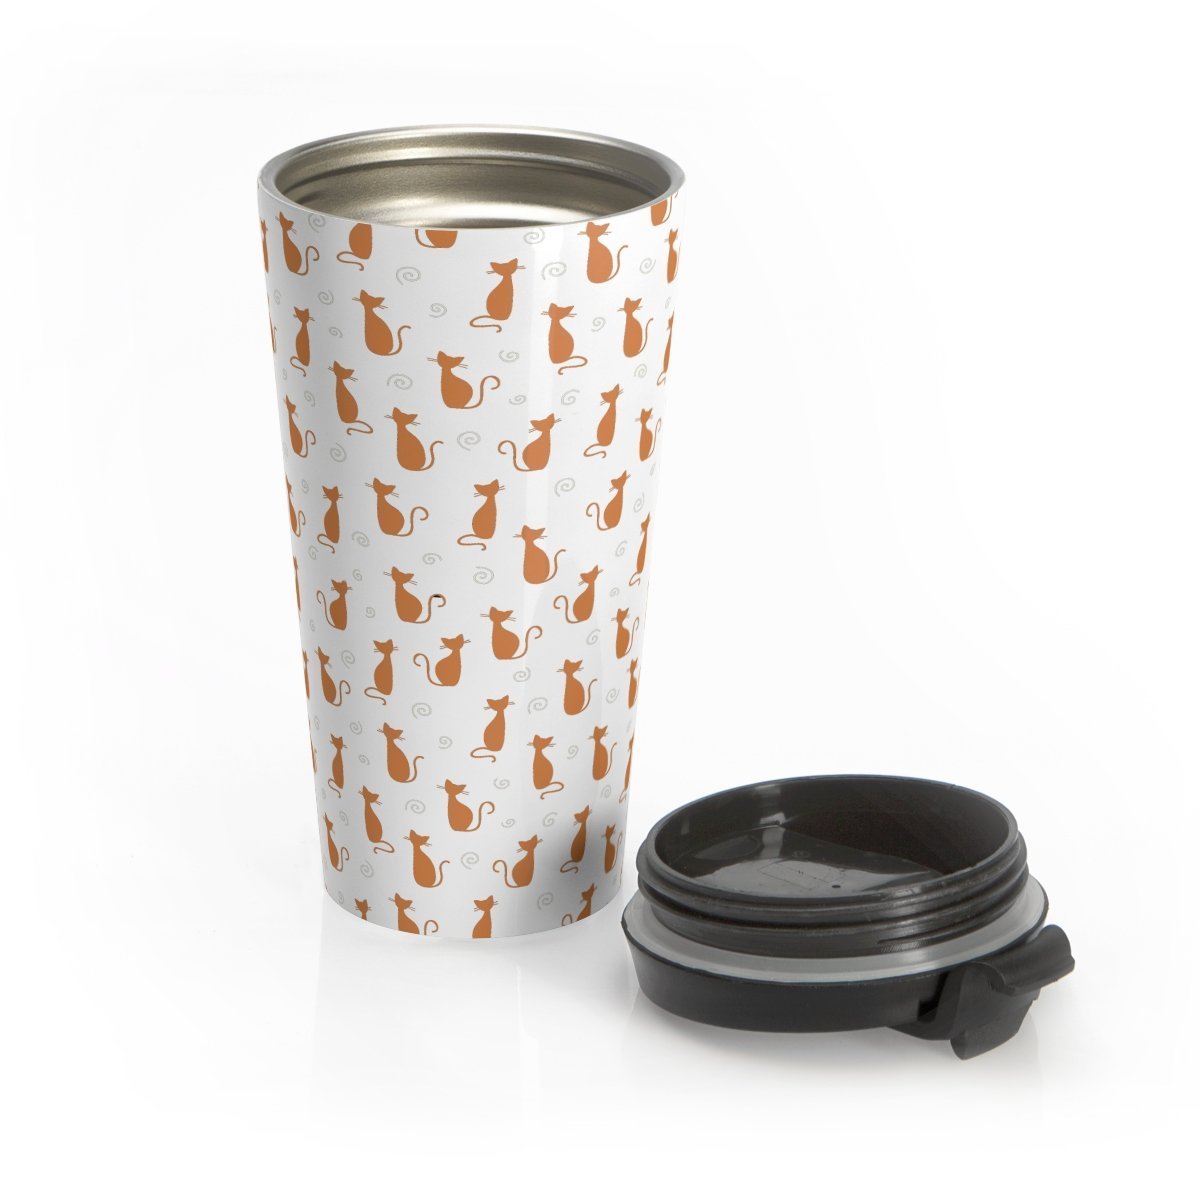 Made from stainless steel, this funny cat travel mug is leak proof and keeps your coffee warm for hours.